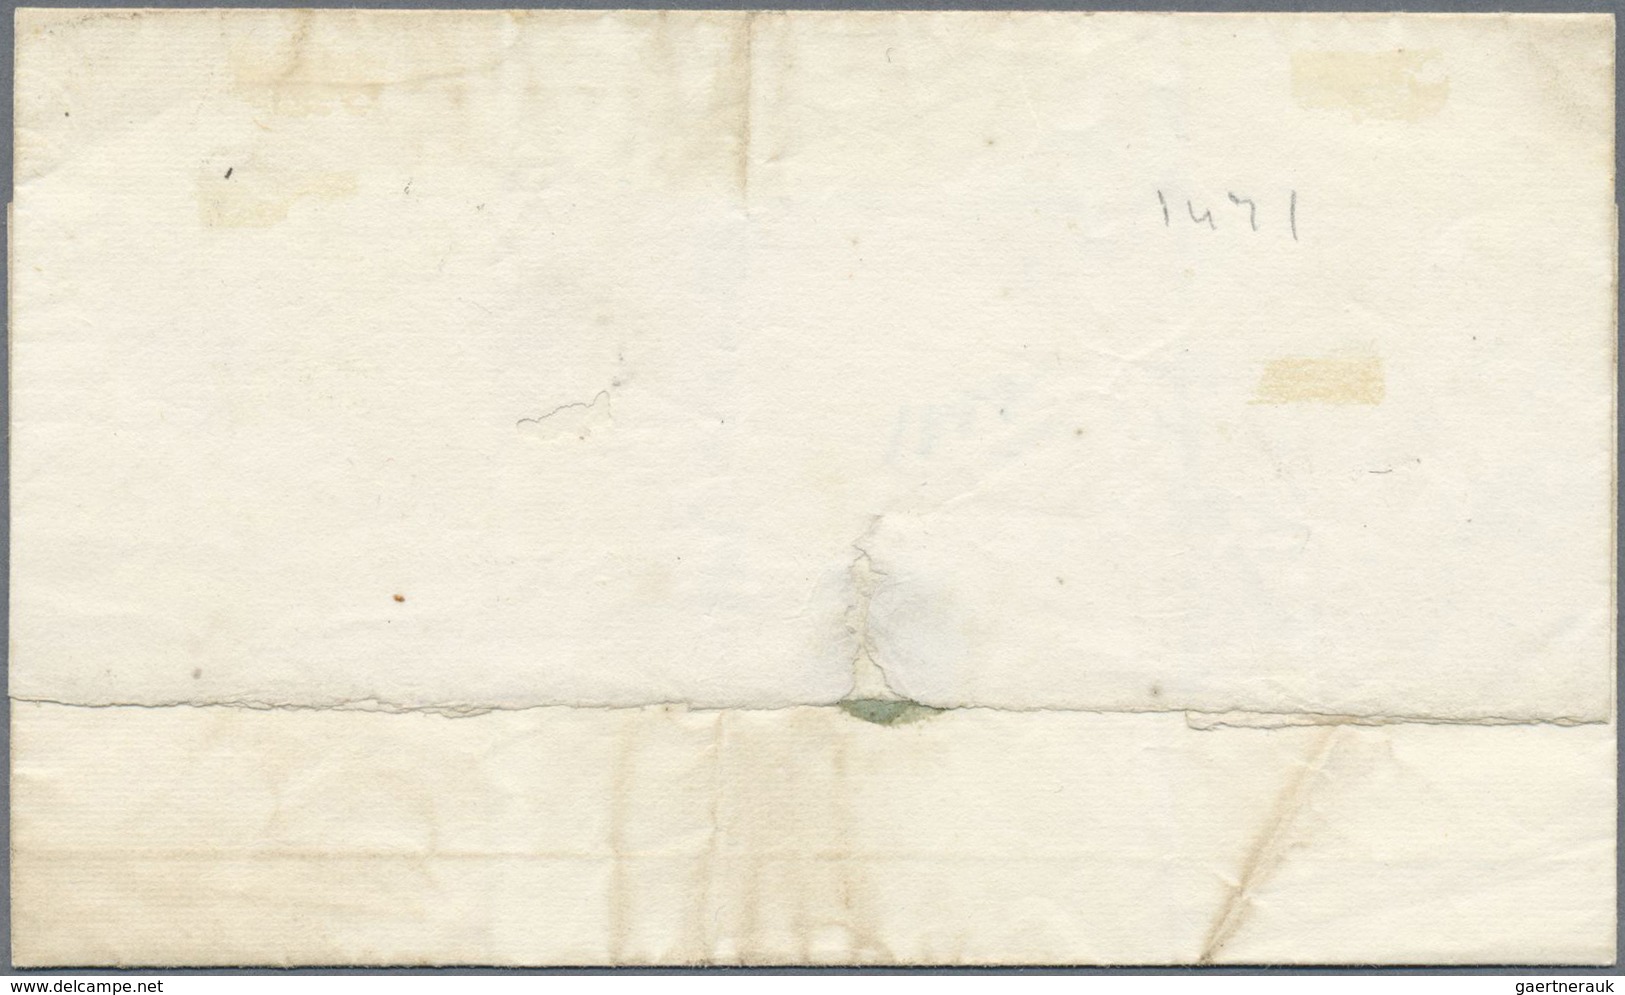 Br Peru: 1825/1830, four folded letters with black one-liners without text from Lima to a Colonel in a